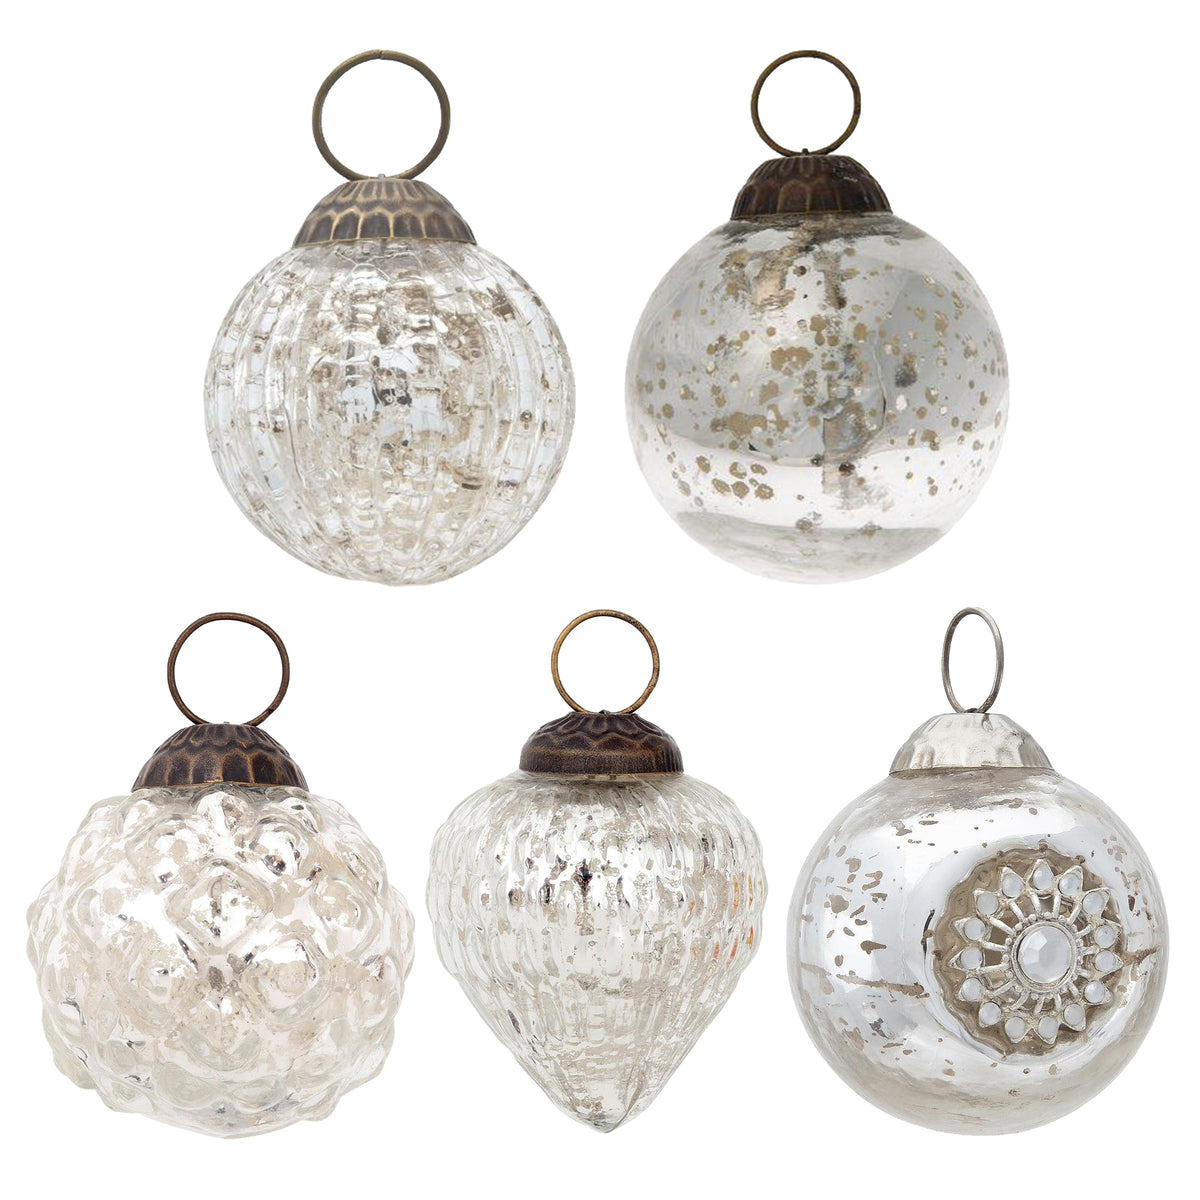 5 Pack | Silver Royal Chic Assorted Ornaments Set - Great Gift Idea, Vintage-Style Decorations for Christmas, Special Occasions, Home Decor and Parties